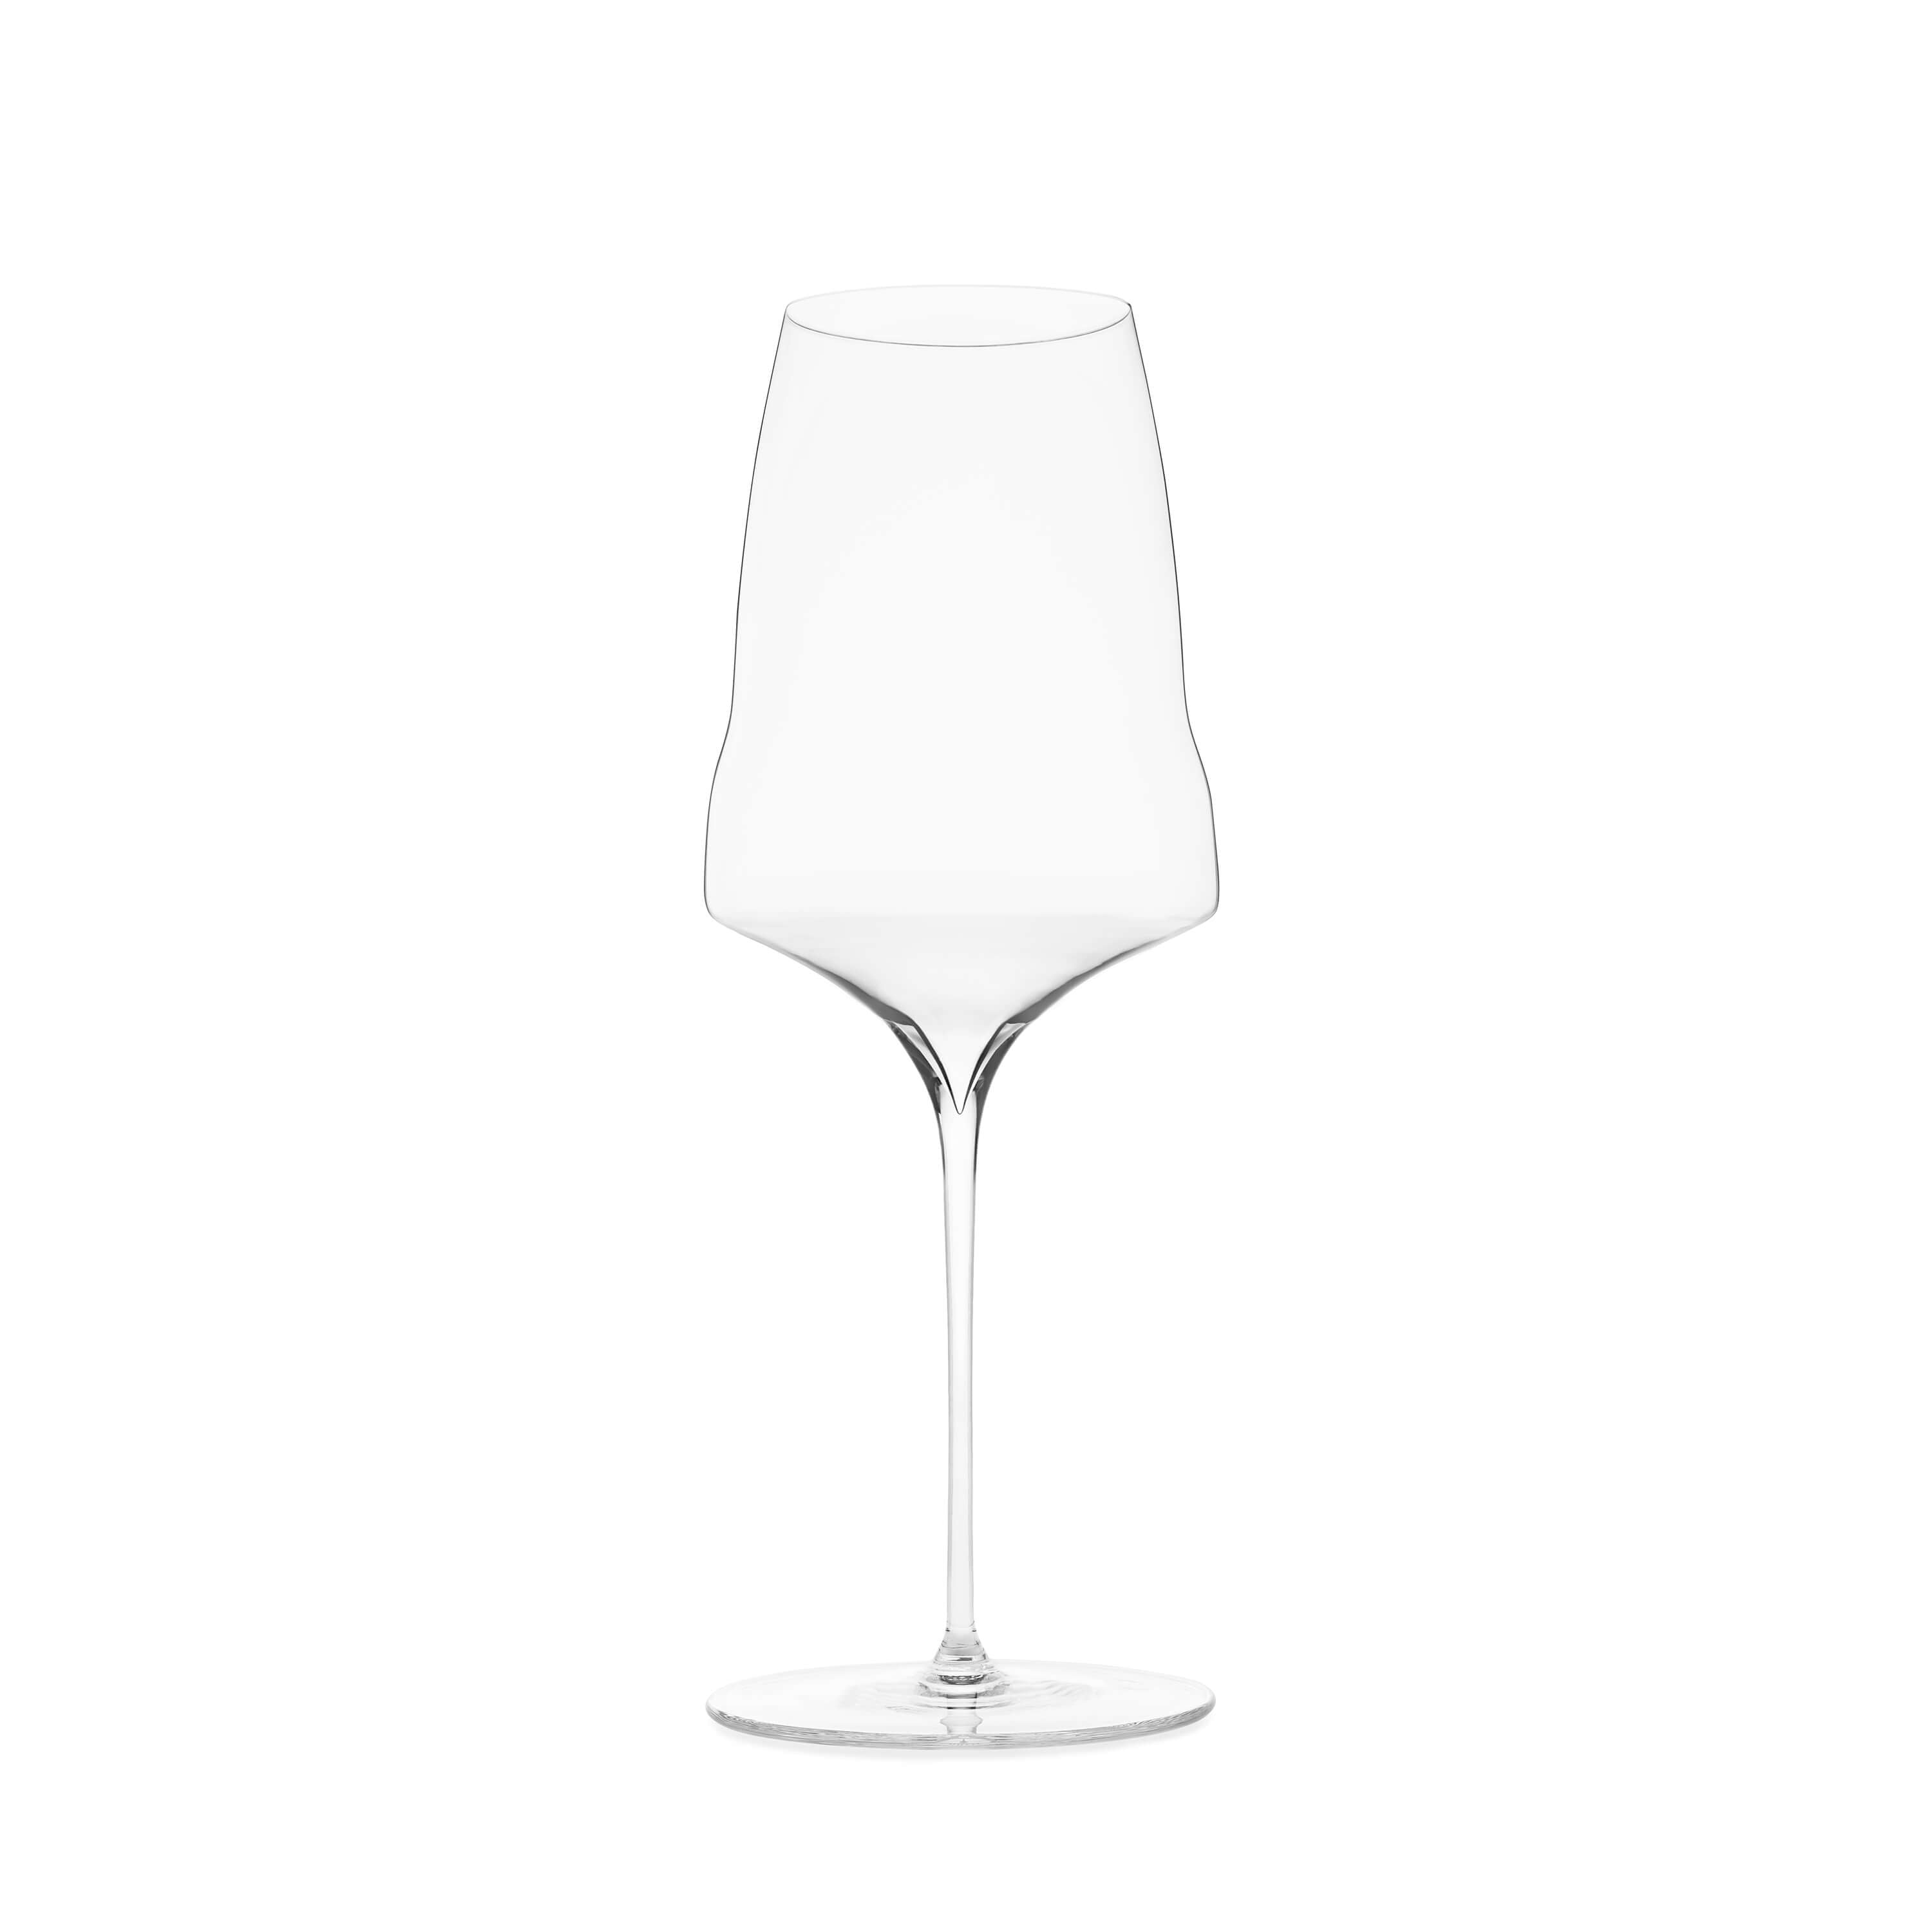 Universal single glass for wine by Josephine